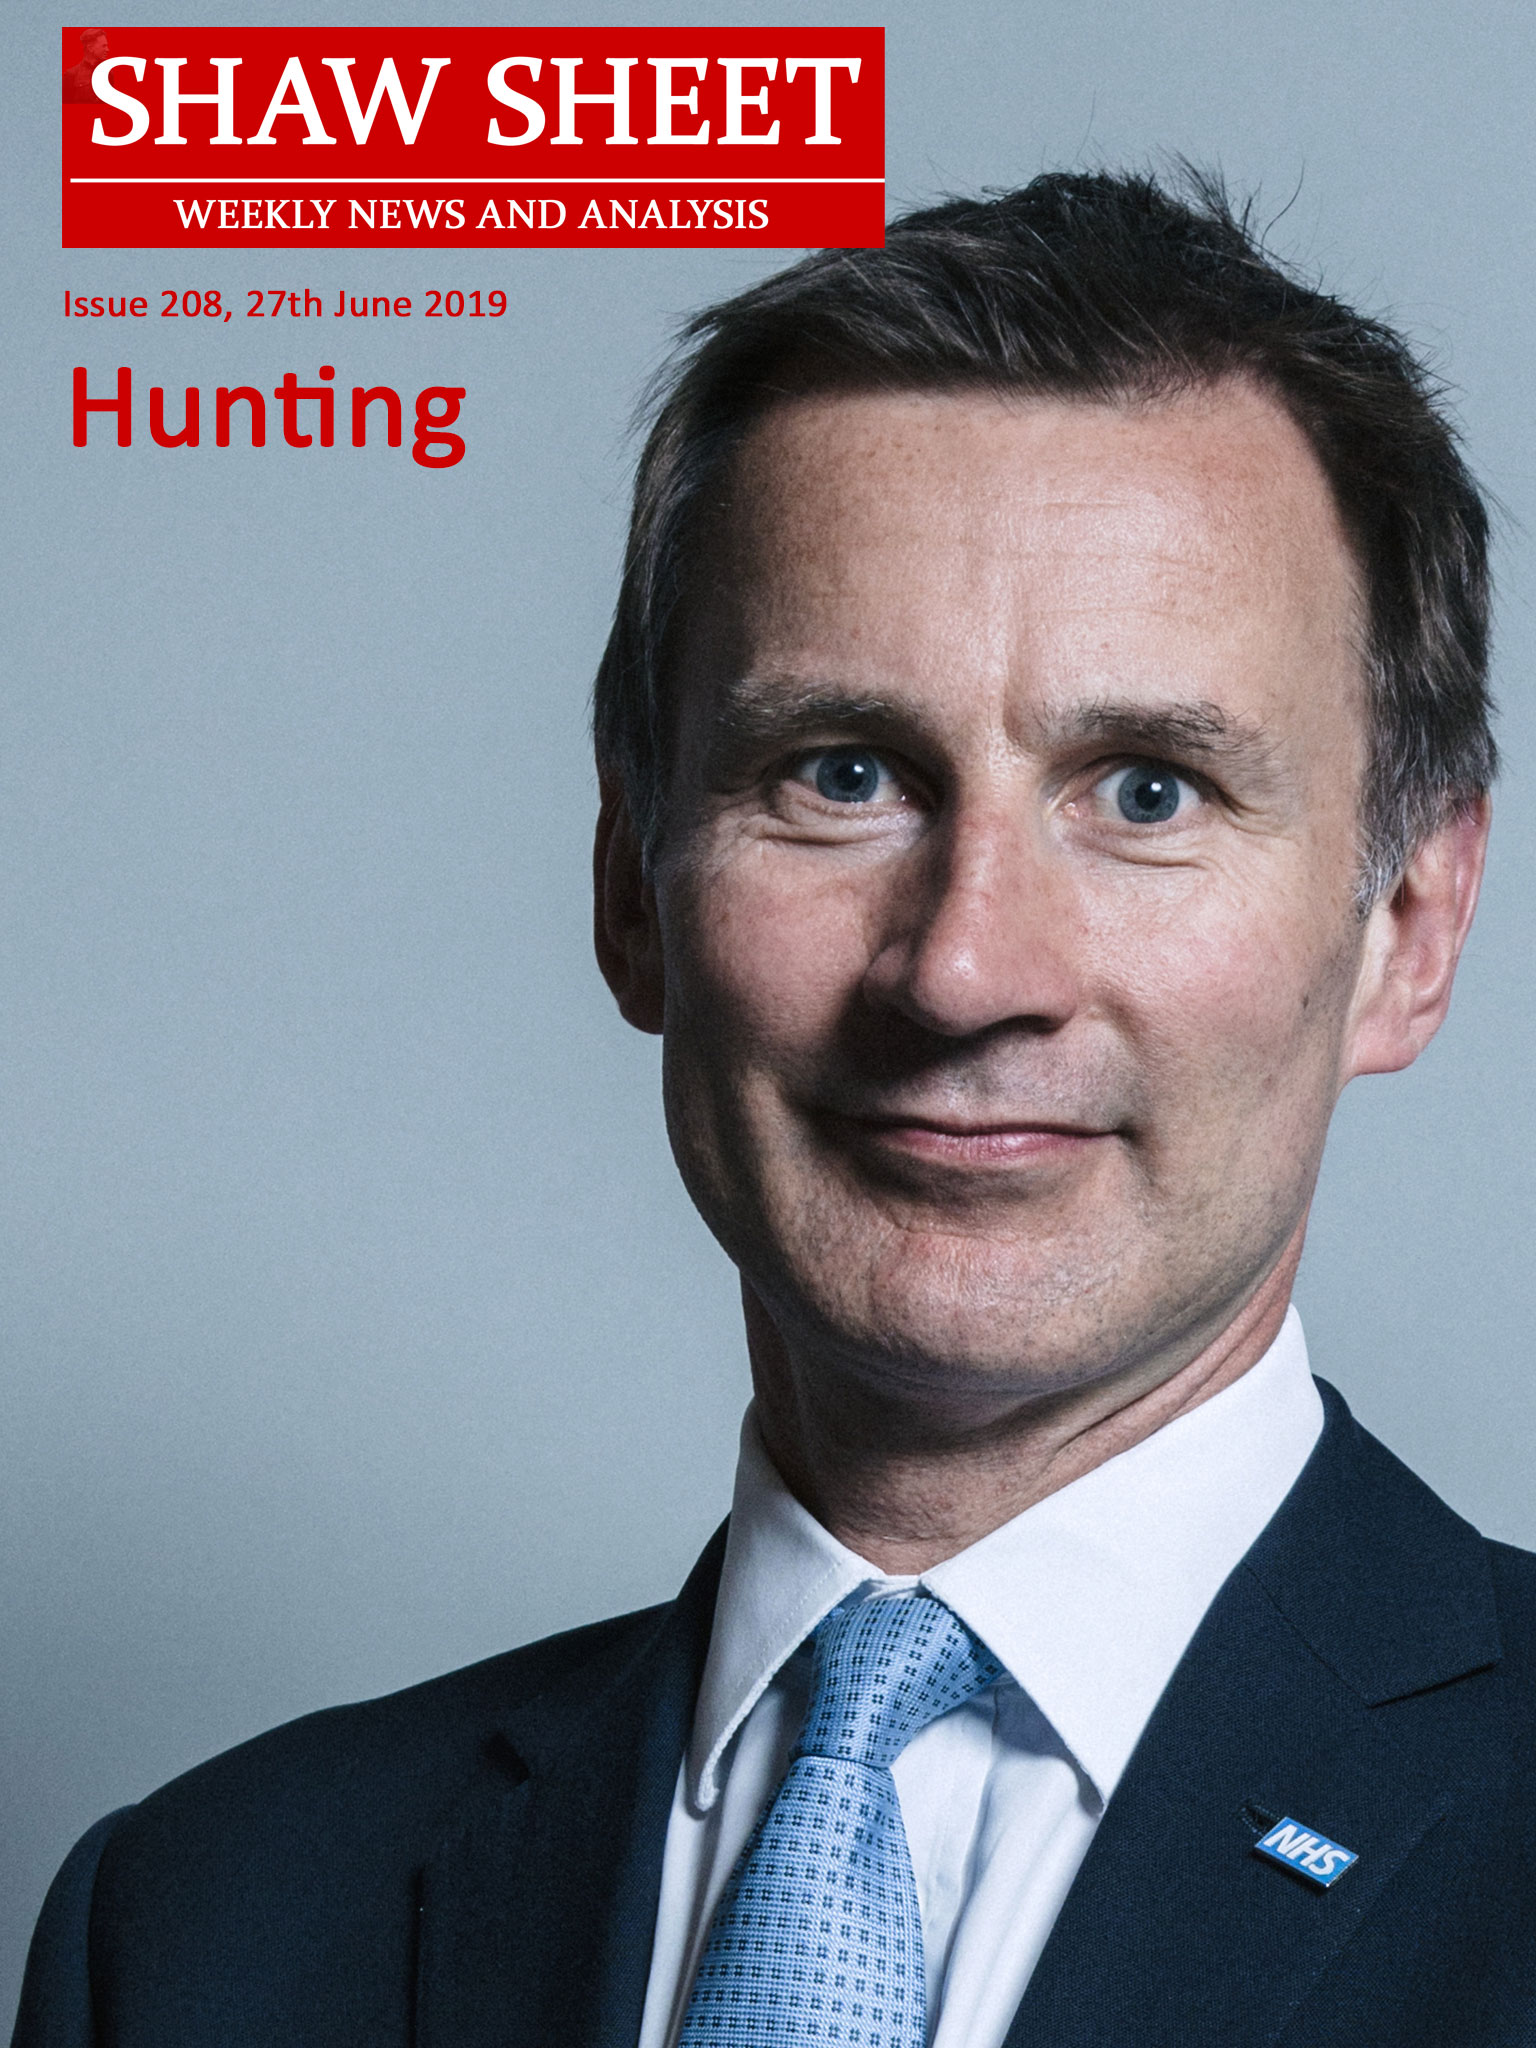 Portrait of Jeremy Hunt, Leadership Candidate, Conservative Party of the UK